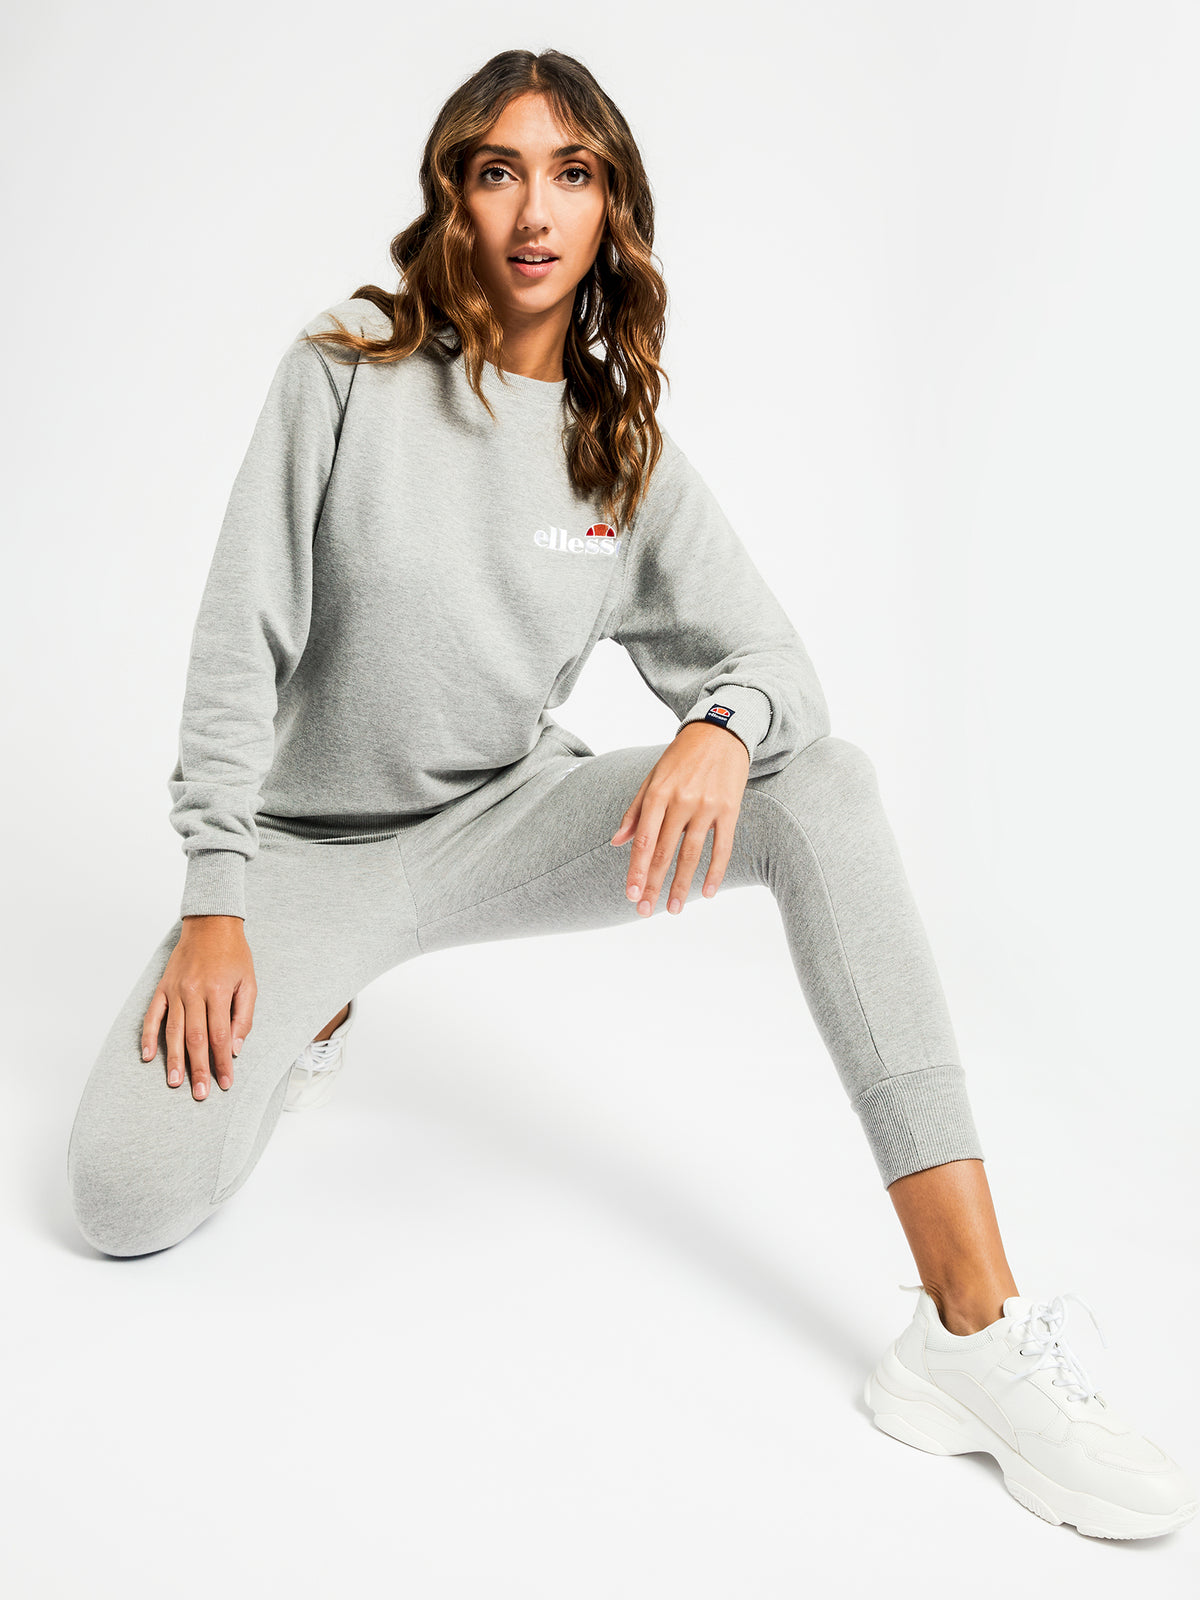 Triome Crew Sweater in Grey Marle